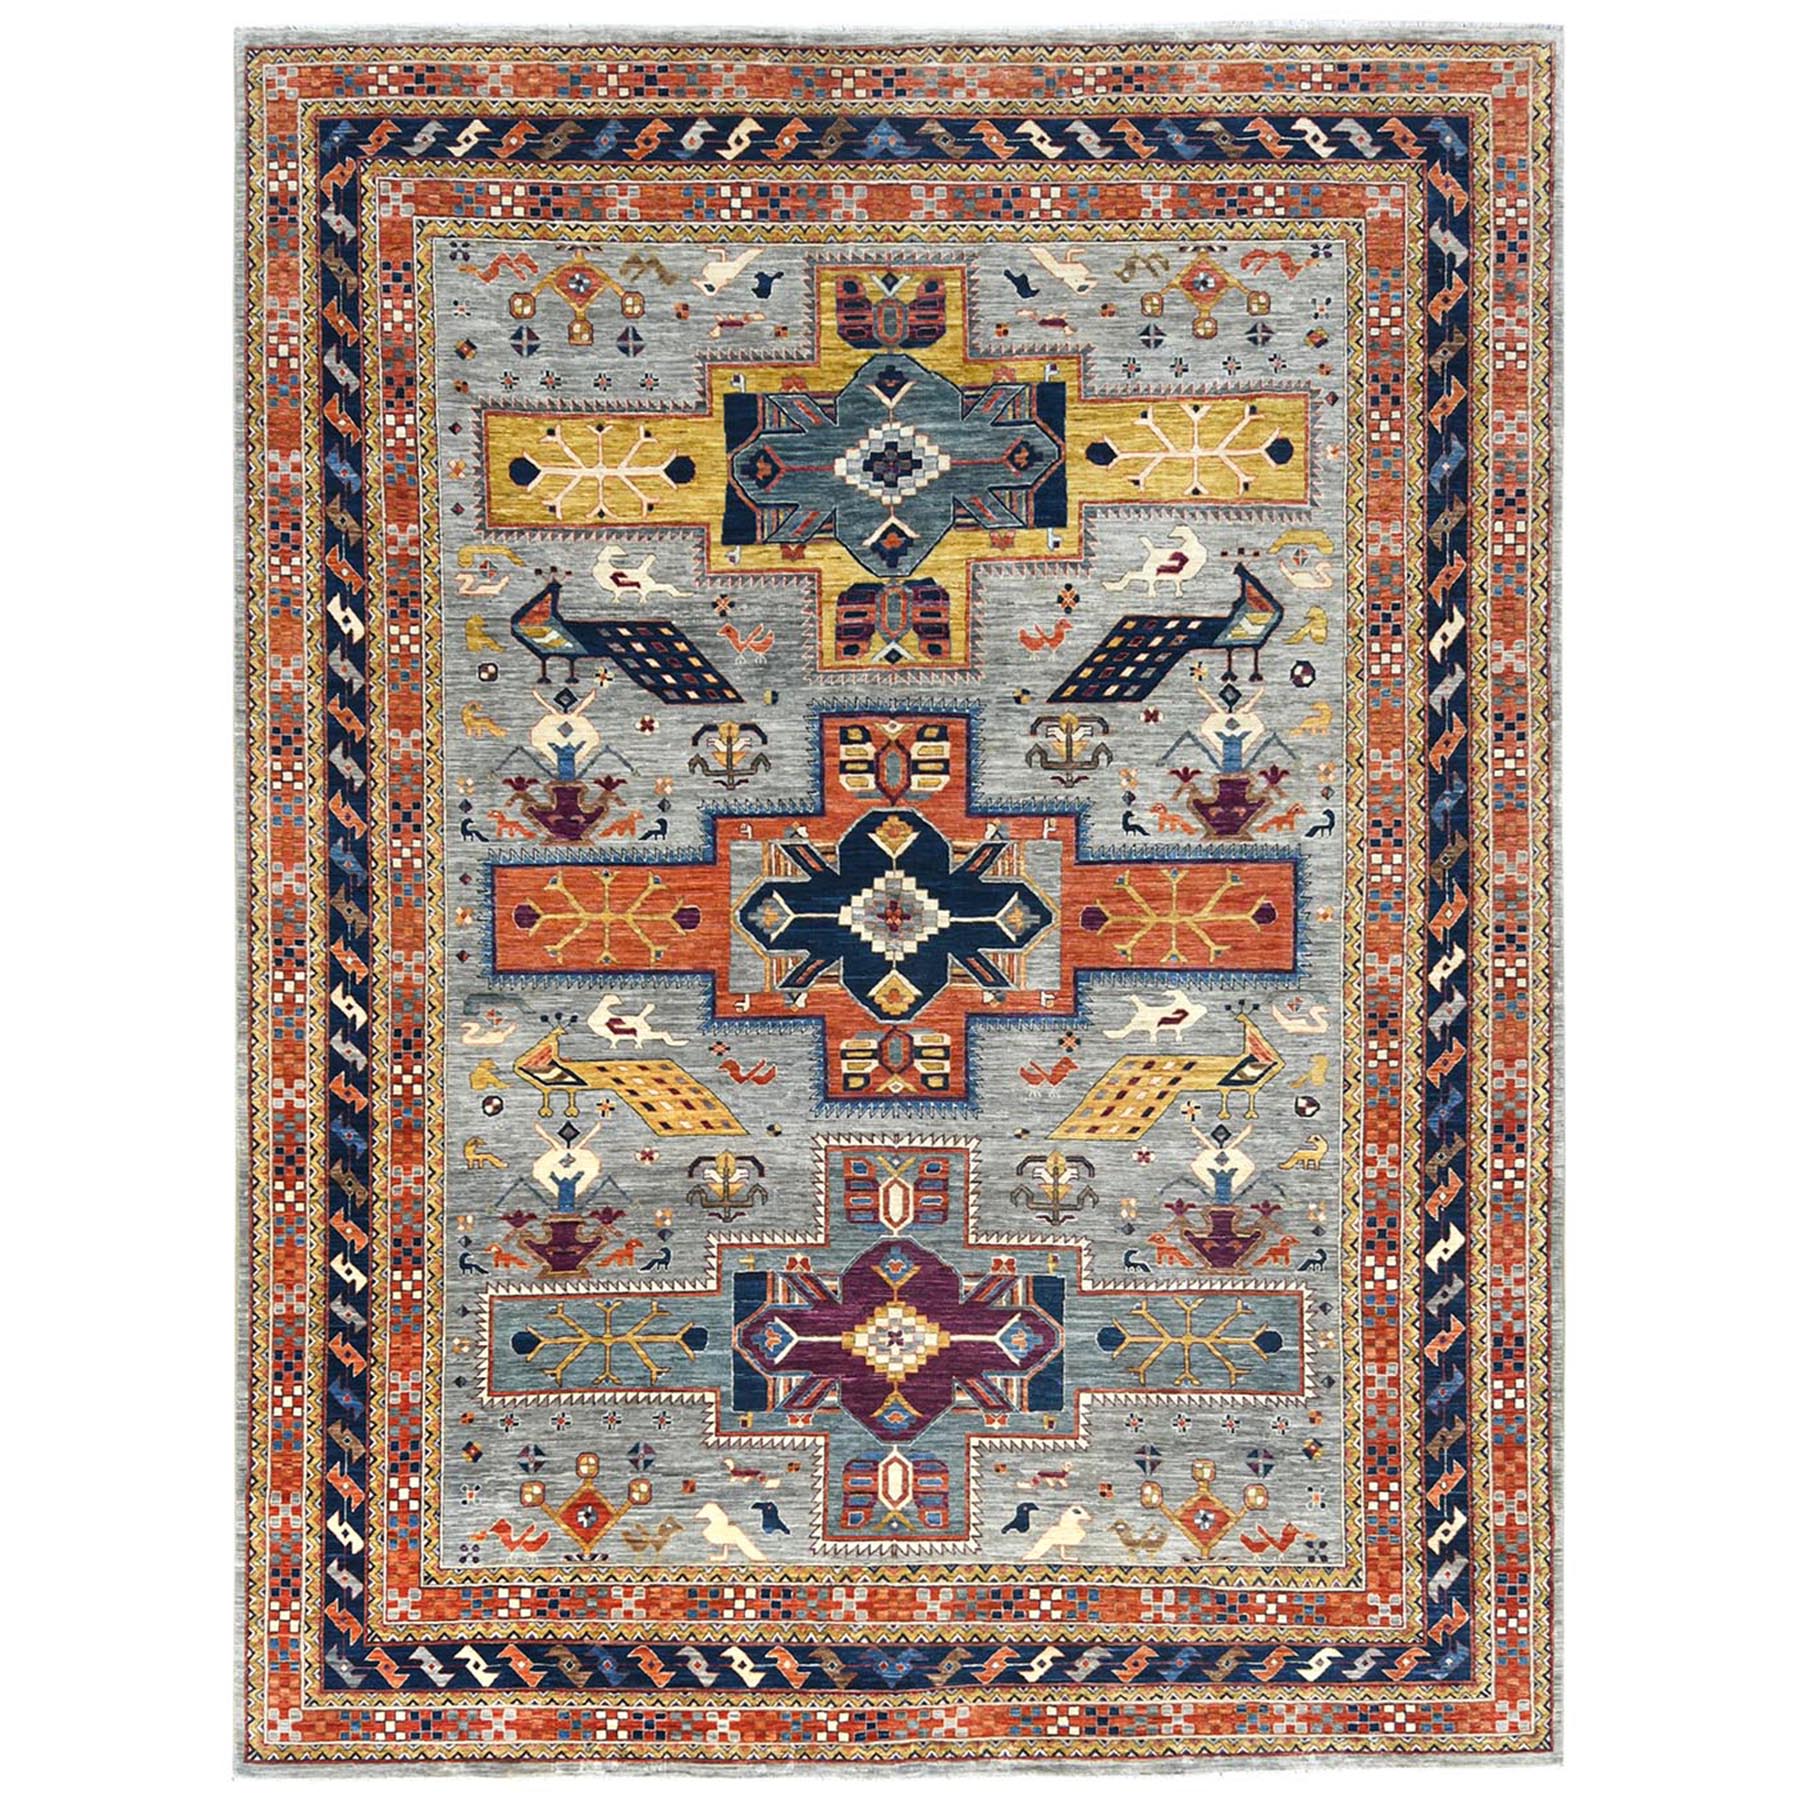 9'1"x11'8" Gray Armenian Inspired Caucasian Design with Bird Figurines, 200 KPSI Densely Woven, Hand Woven, Natural Dyes Ghazni Wool Oriental Rug 